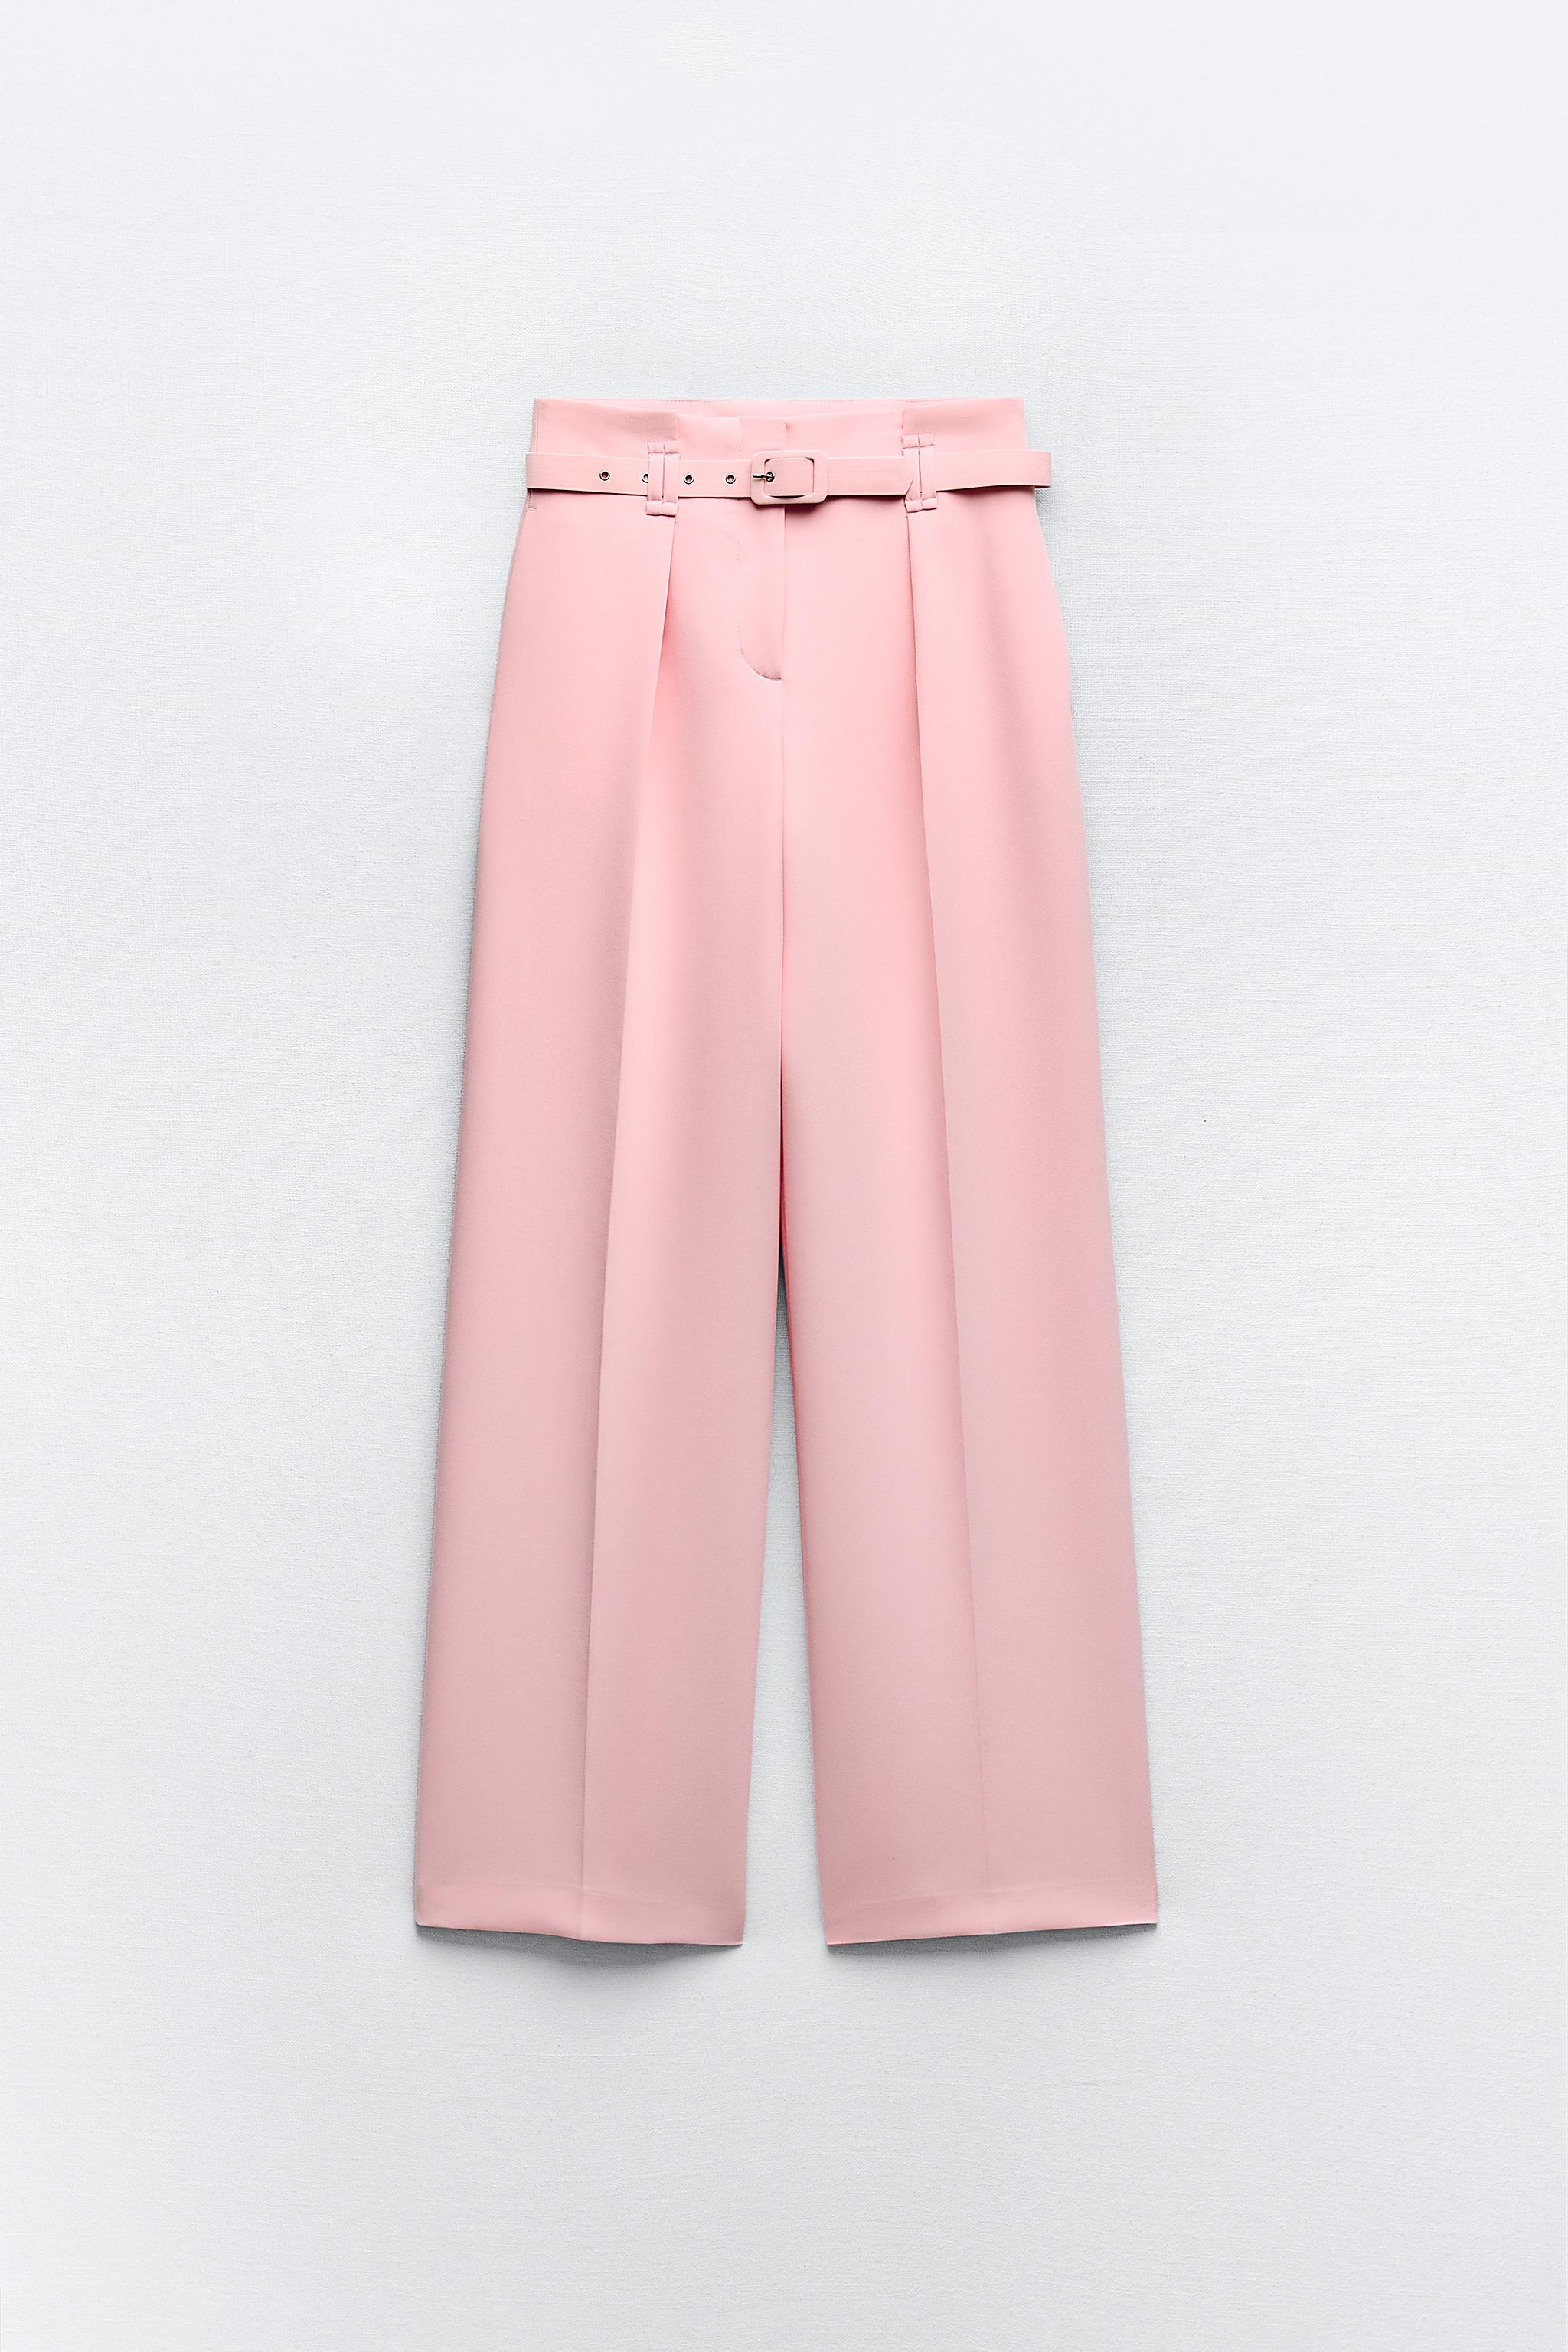 Zara high waisted lilac belted pants small NWT  Belted pants, Pants for  women, Clothes design